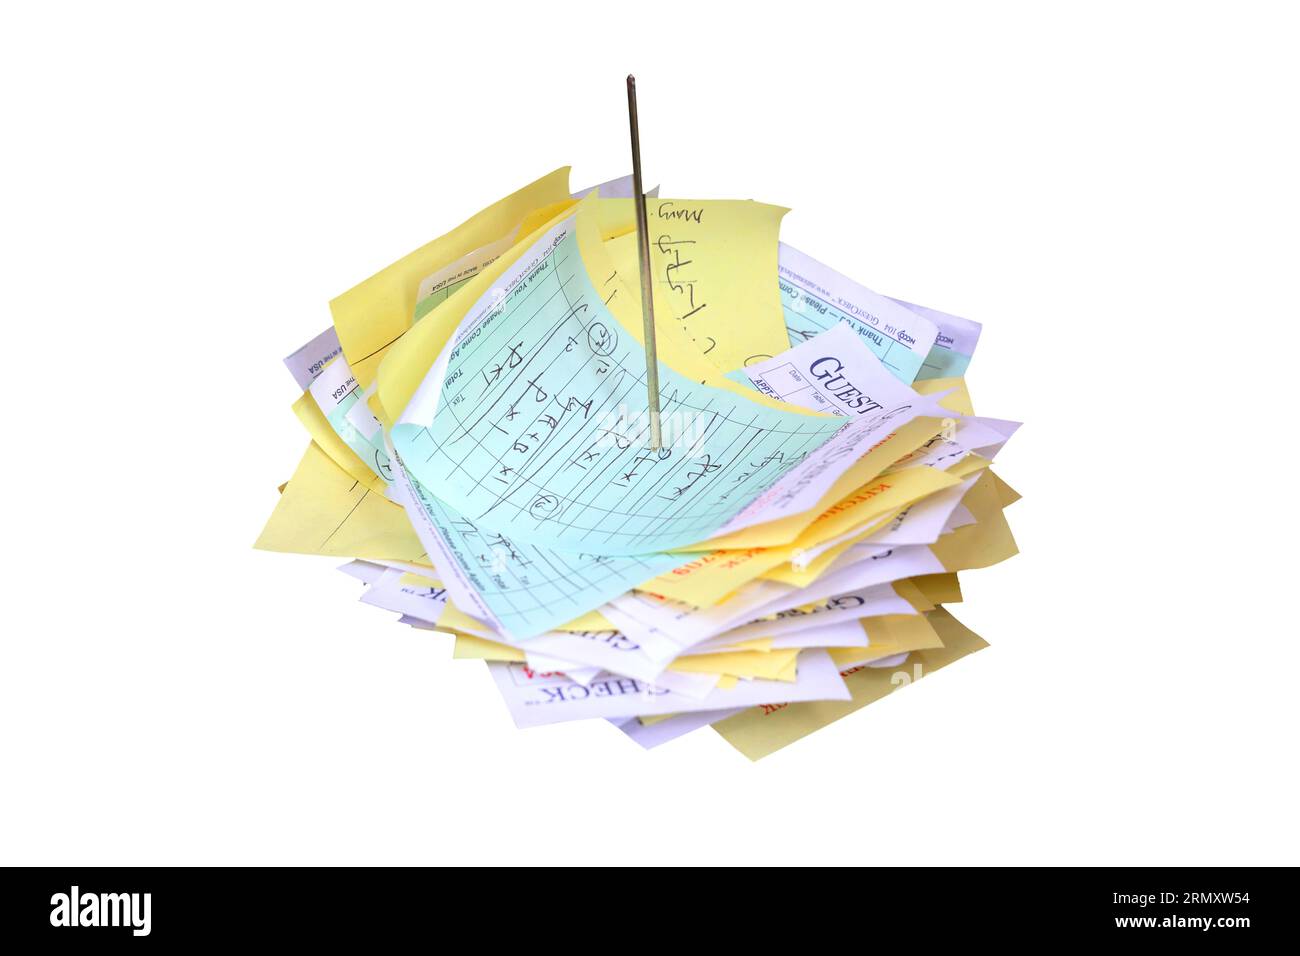 A straight rod, spiked memo holder holding food orders and receipts isolated on a white background. Stock Photo